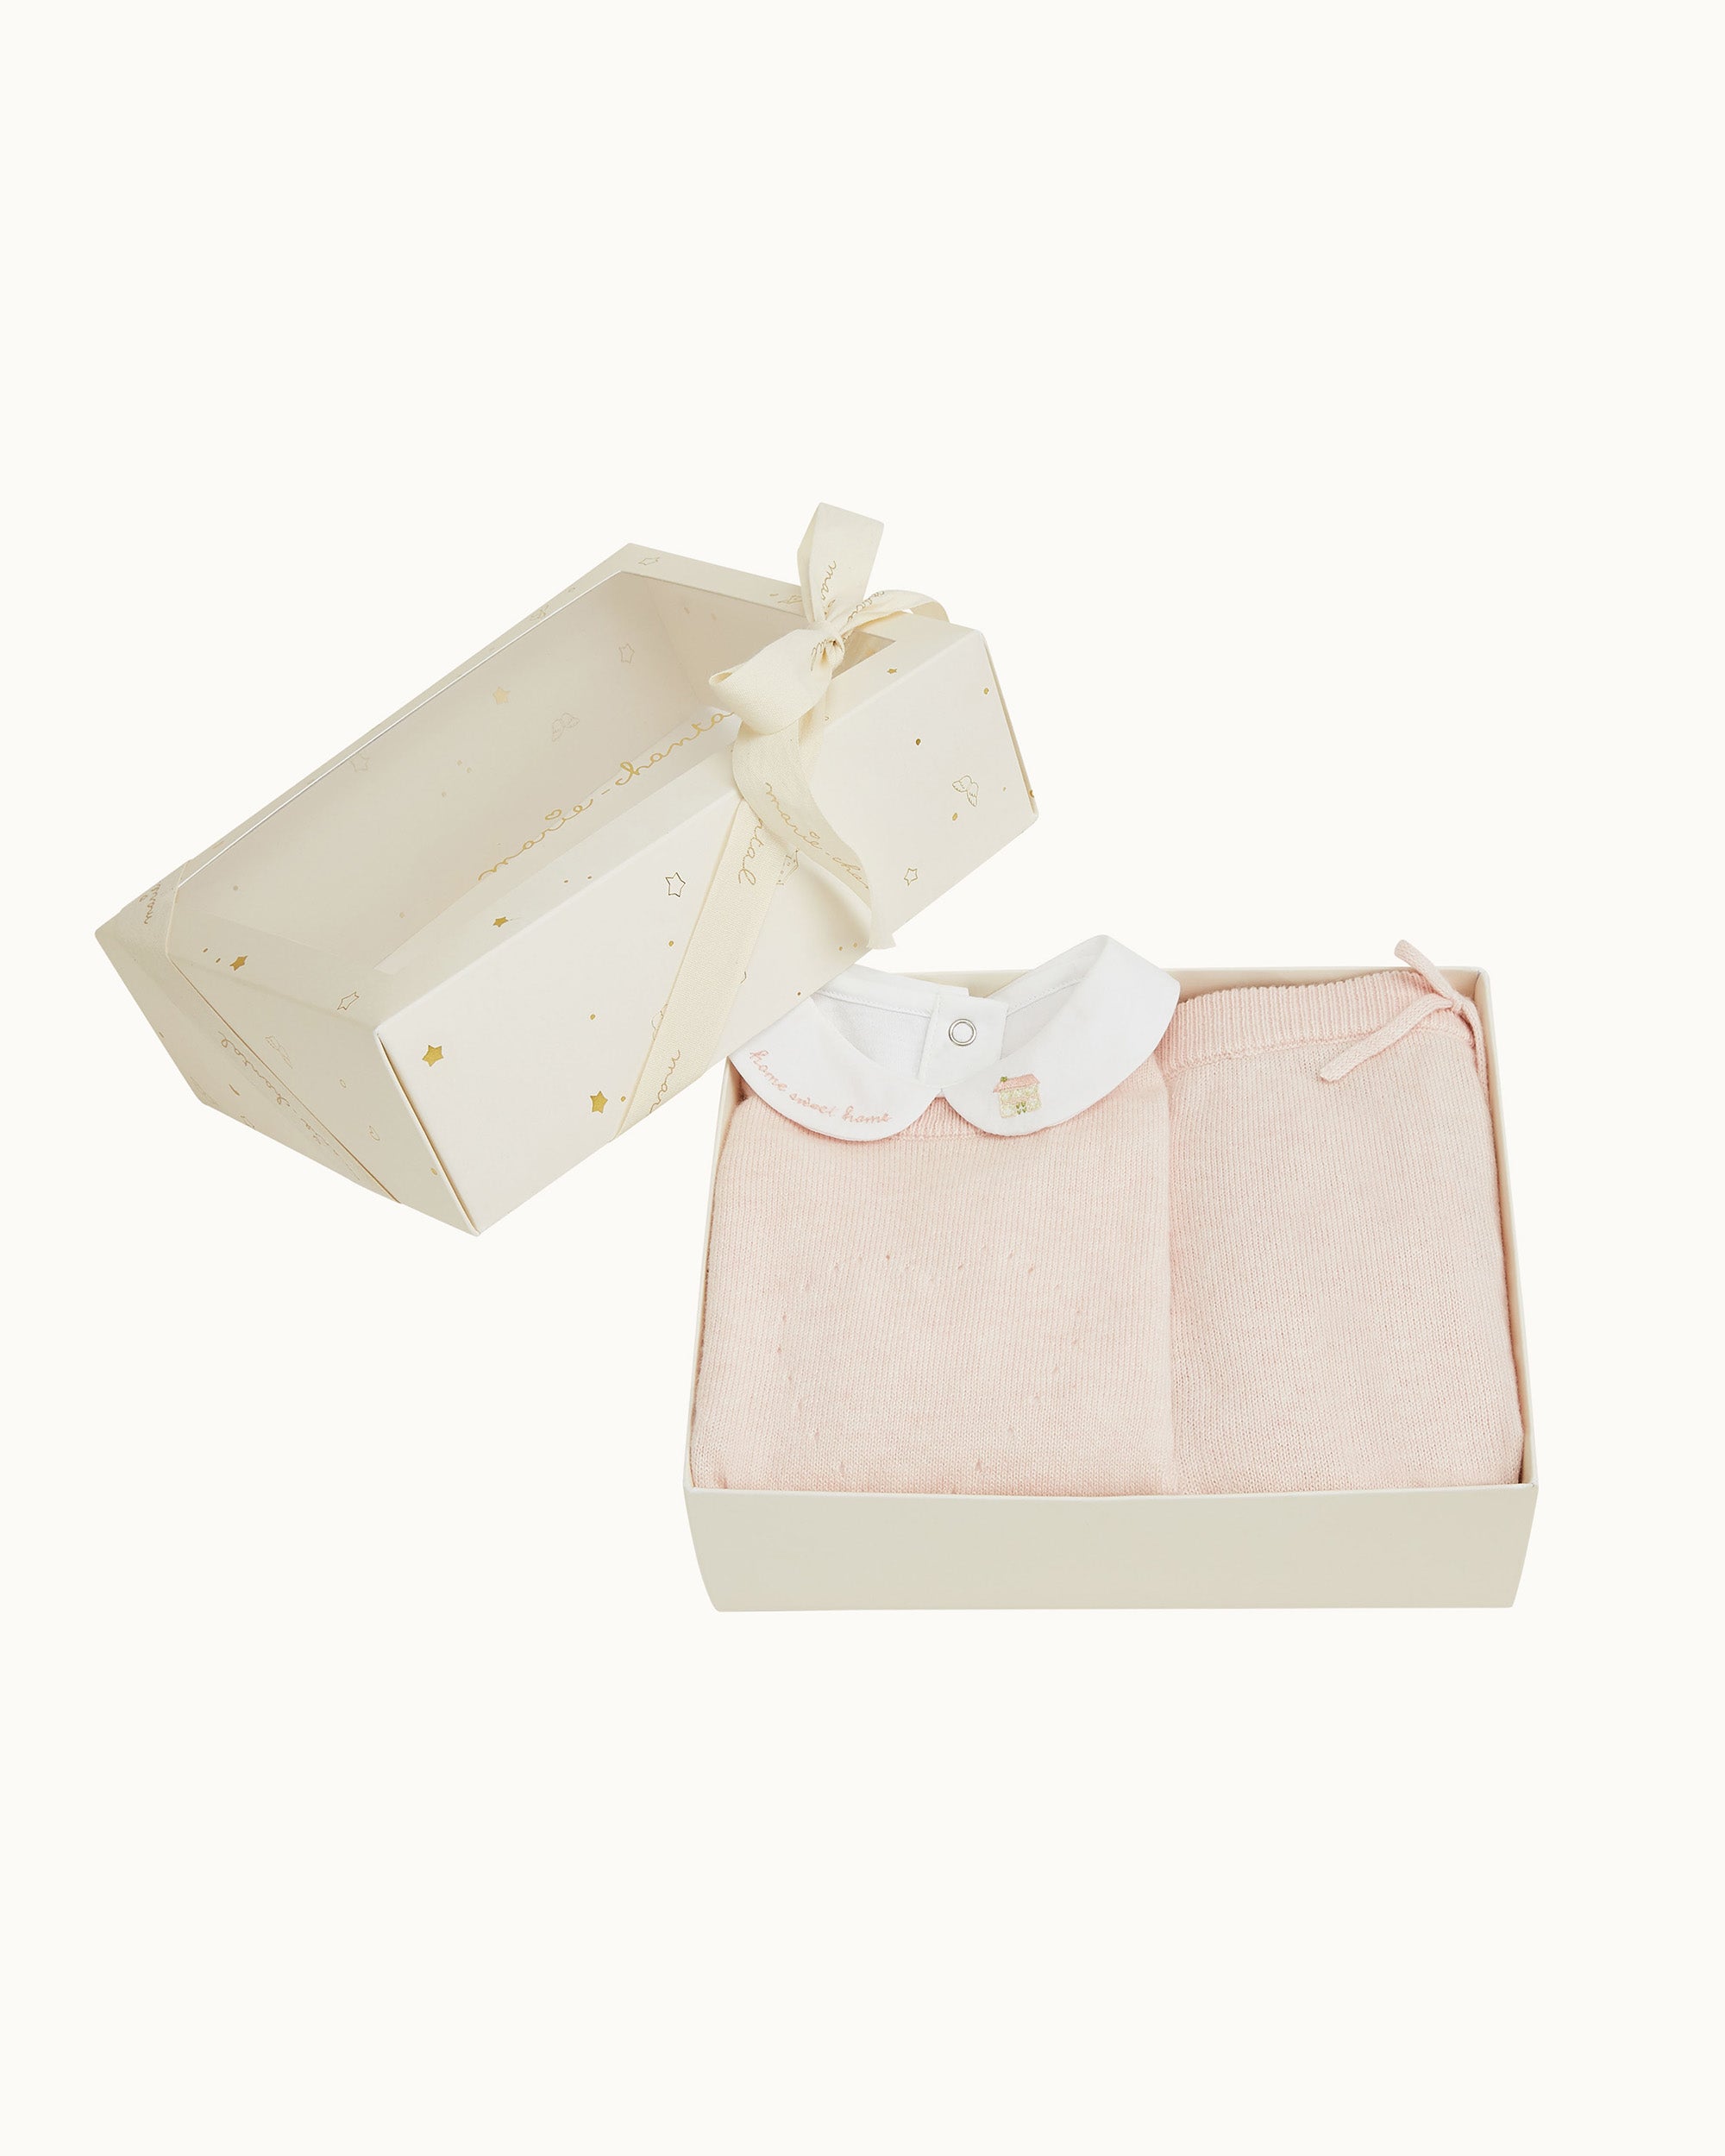 Home Sweet Home Gift Set - Pink